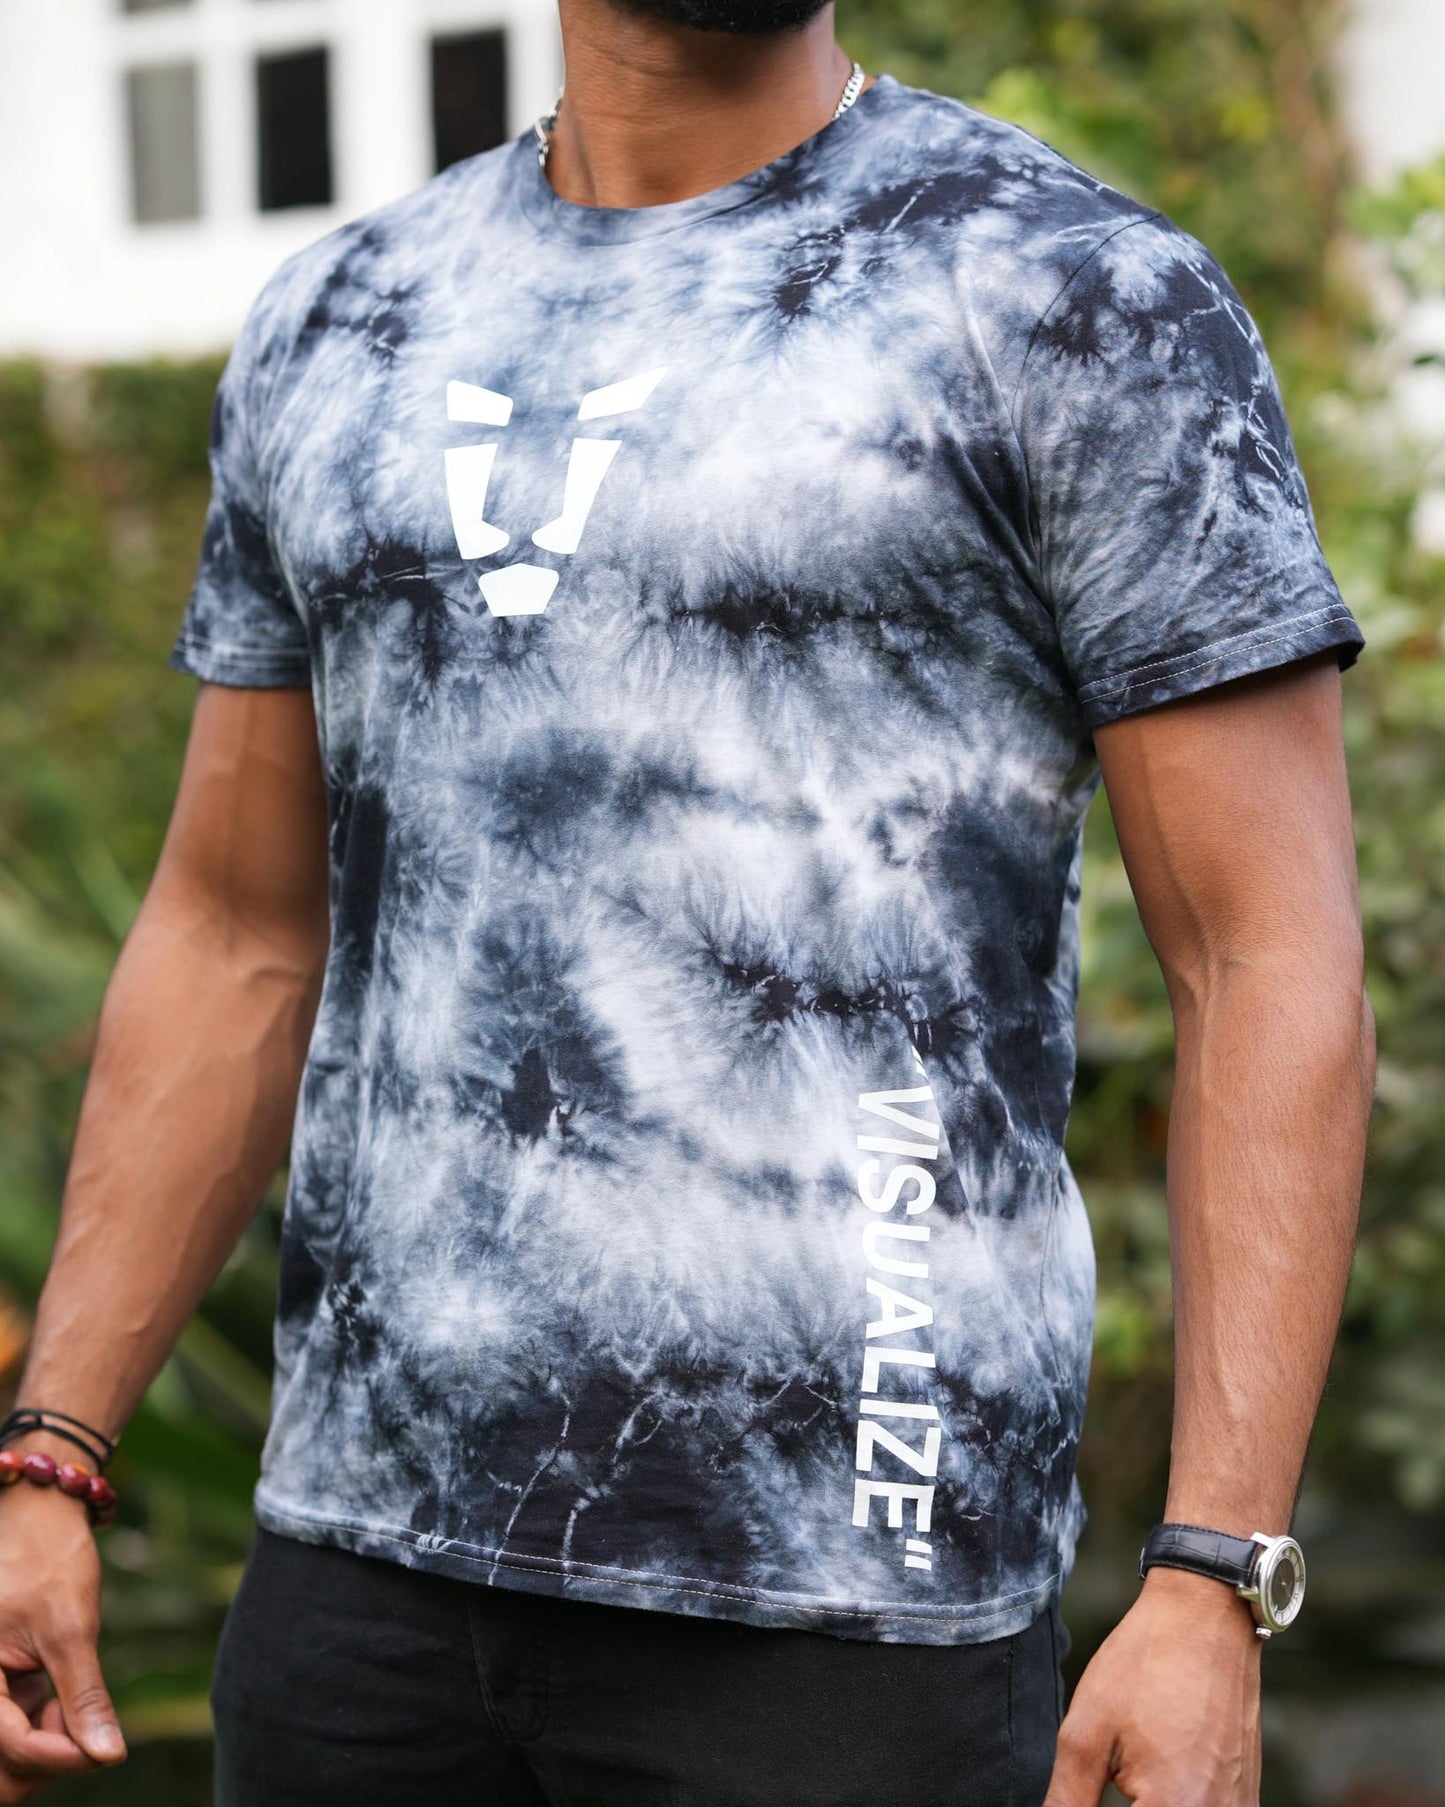 Vybe "VISUALIZE" cloud storm tee